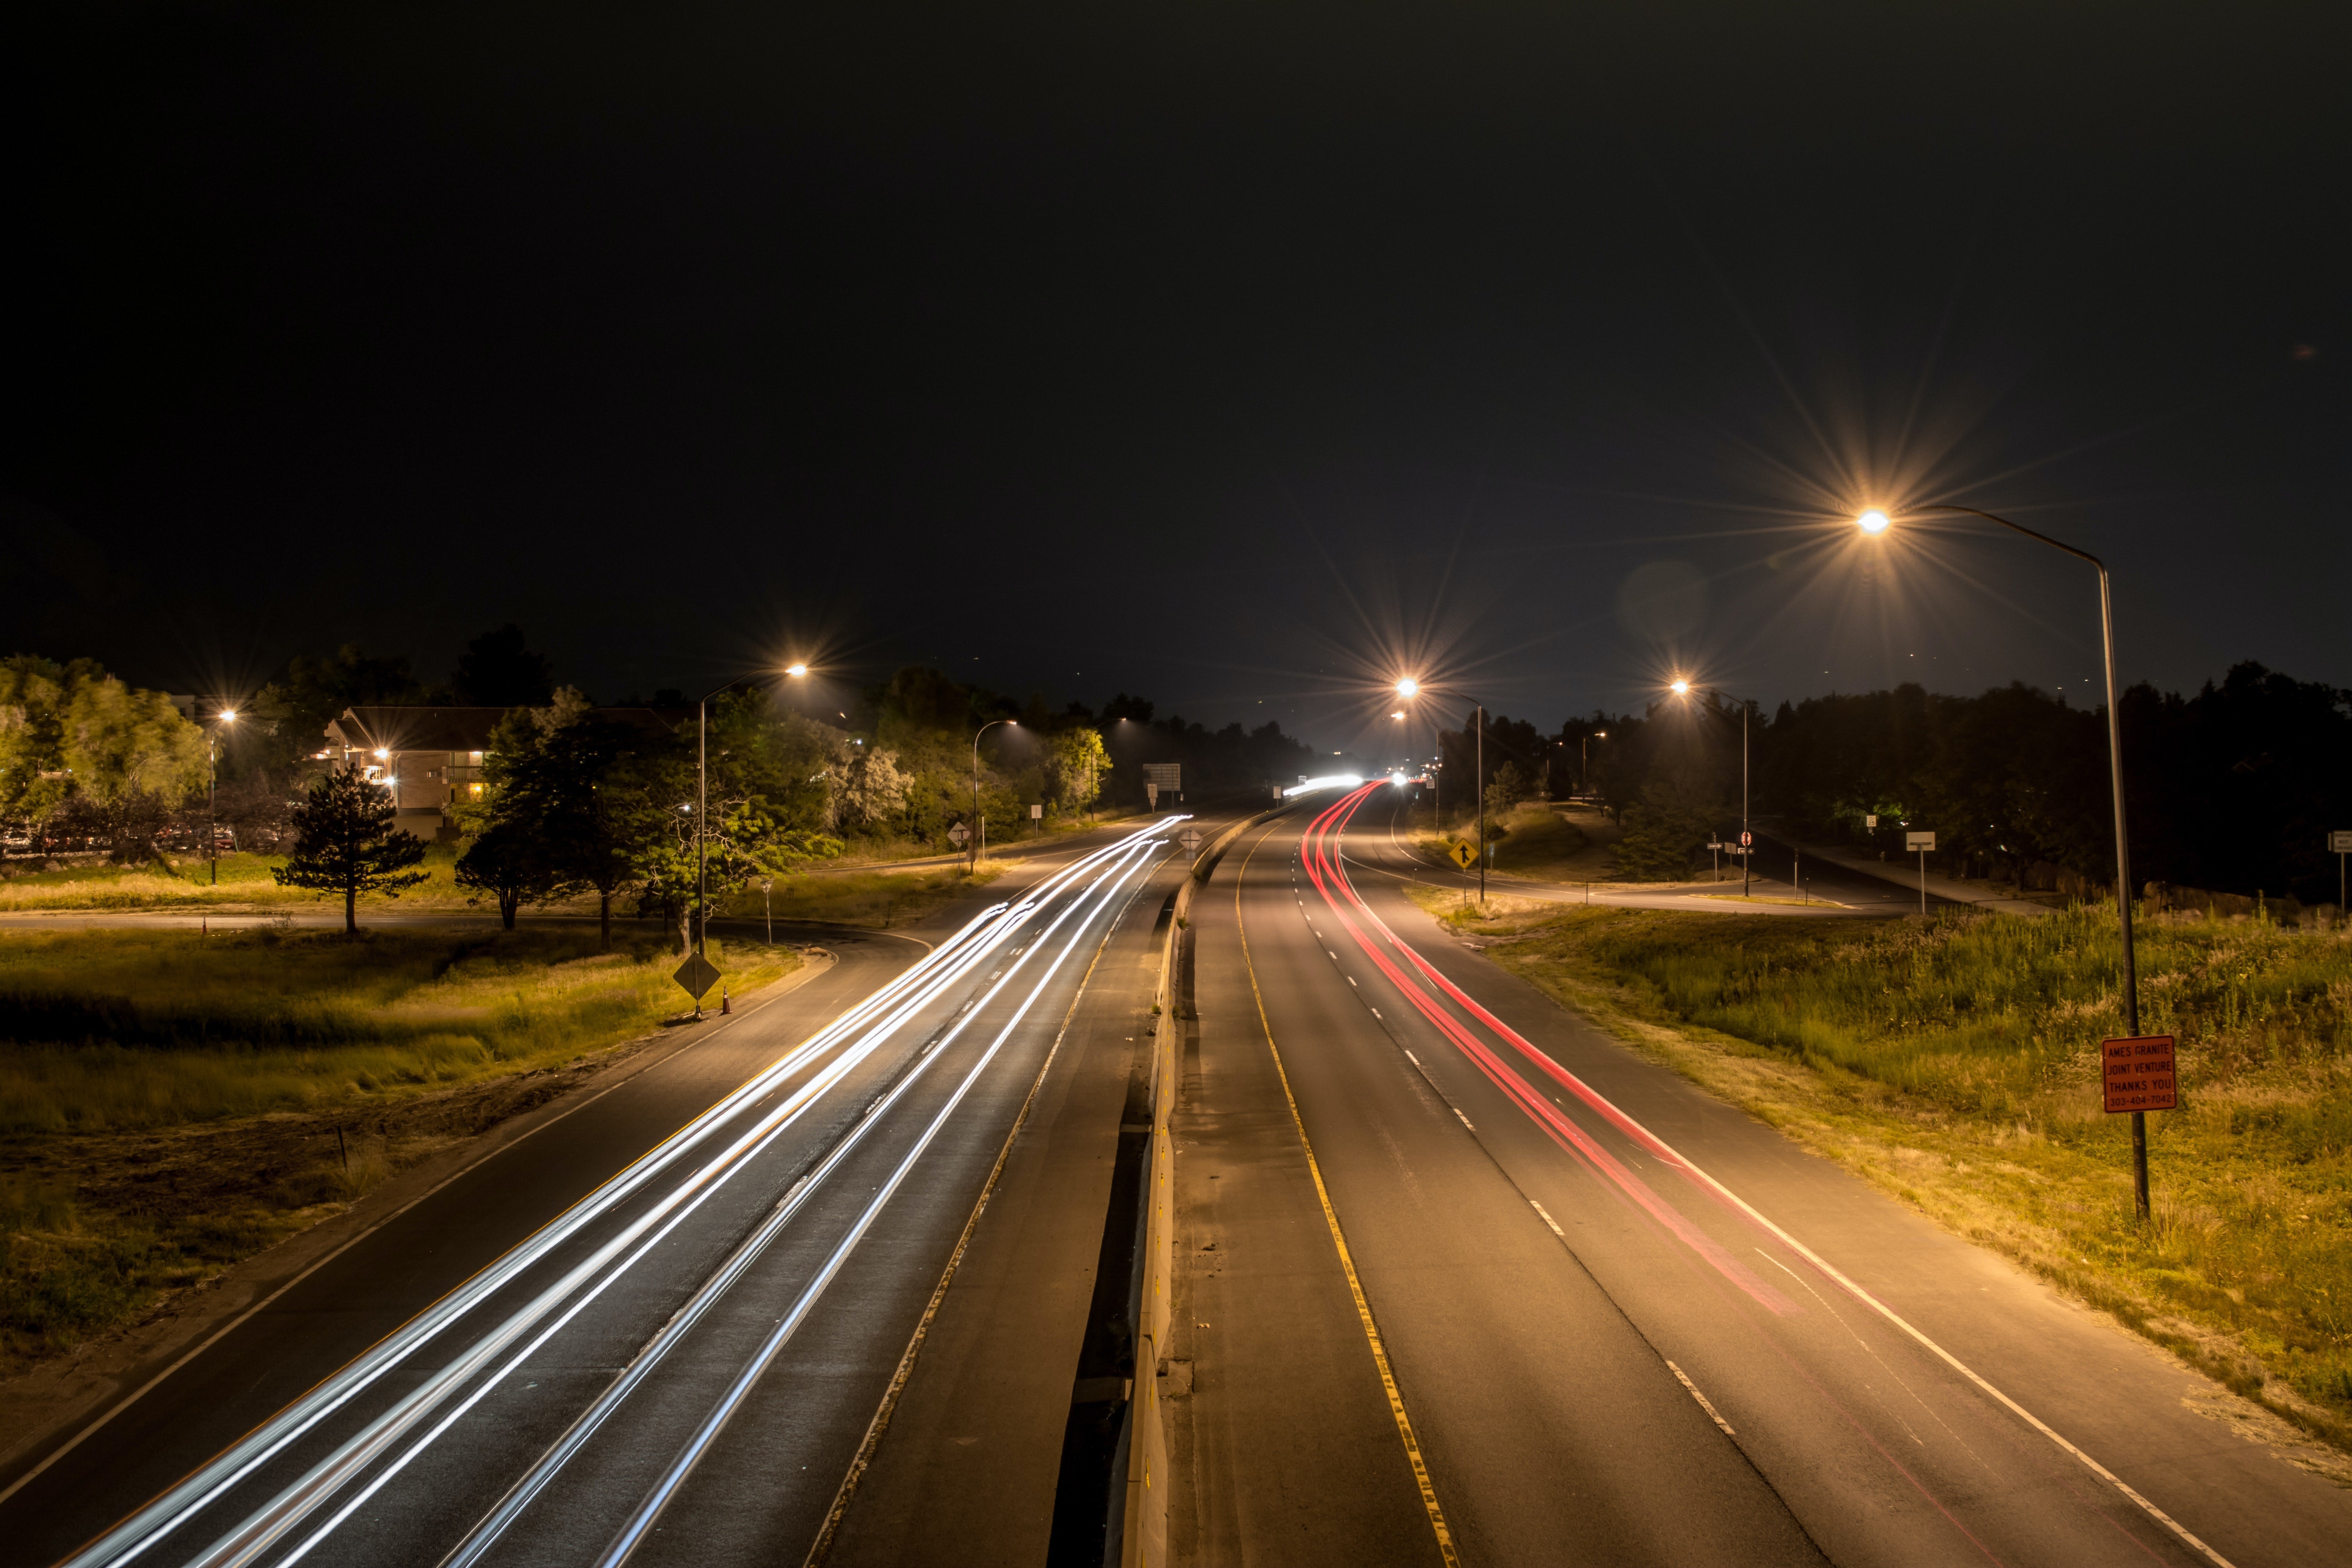 Cars driving across a large road at night.